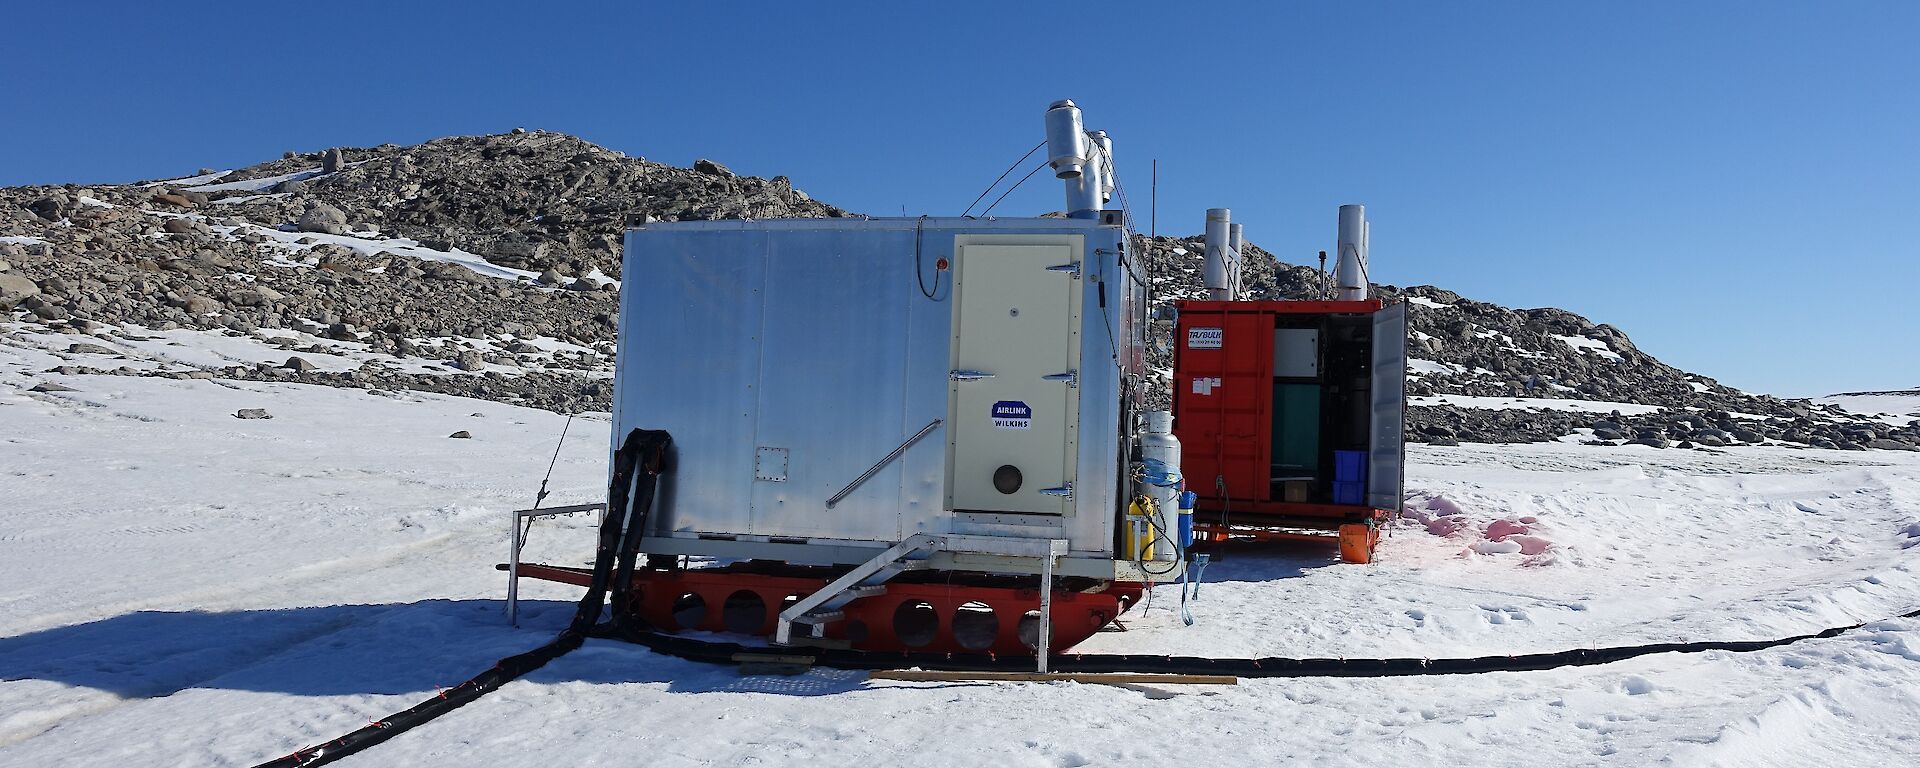 A silver caravan known as the “Silver Chalet” houses the sensor system, data logging and communications equipment on the sea ice